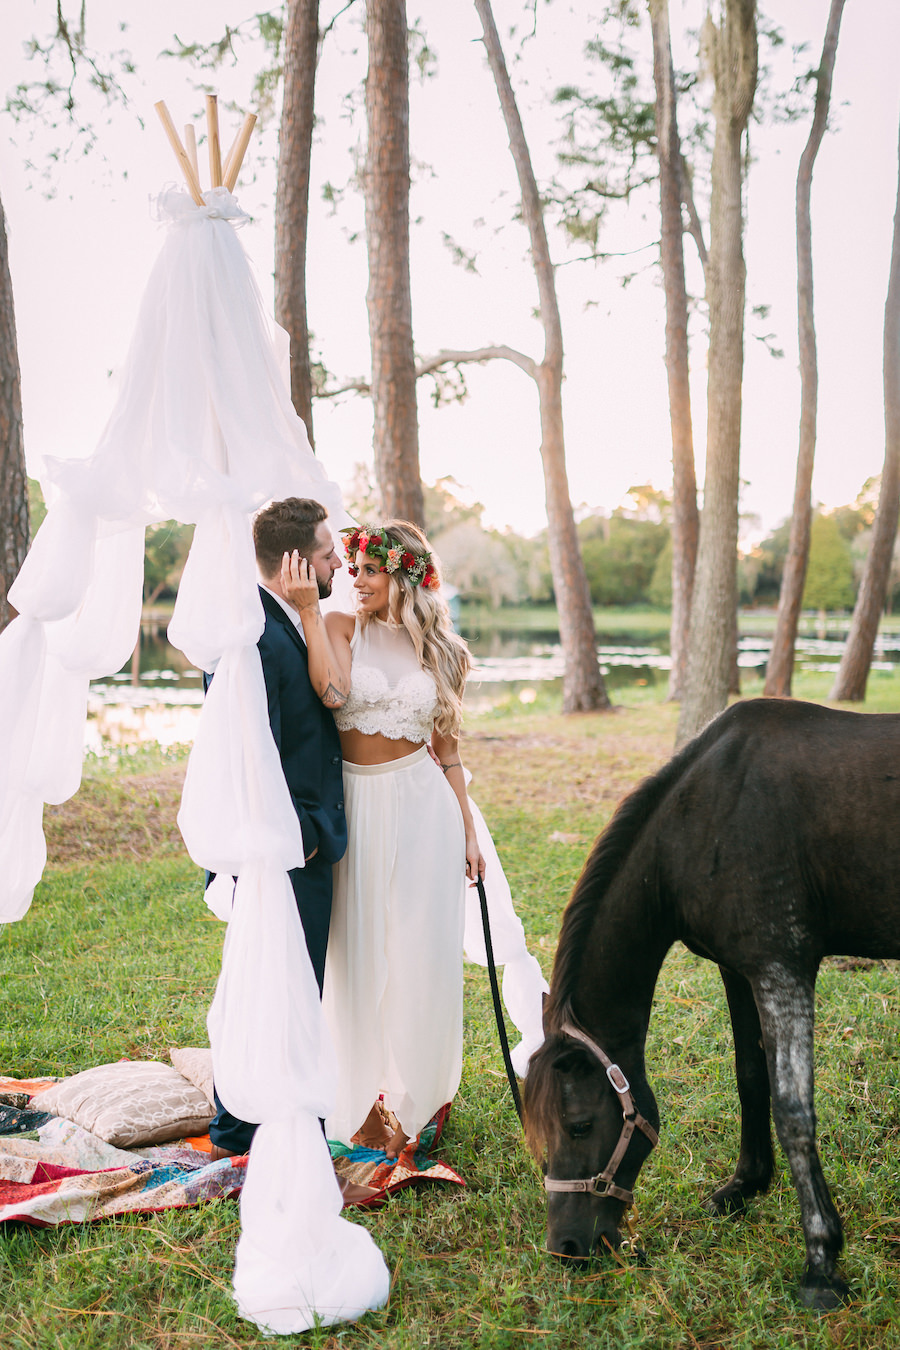 Boho Chic Wedding Portrait with Flower Crown and Horse Rustic Tampa Bay Wedding Venue The Barn at Crescent Lake at Old McMicky's Farm